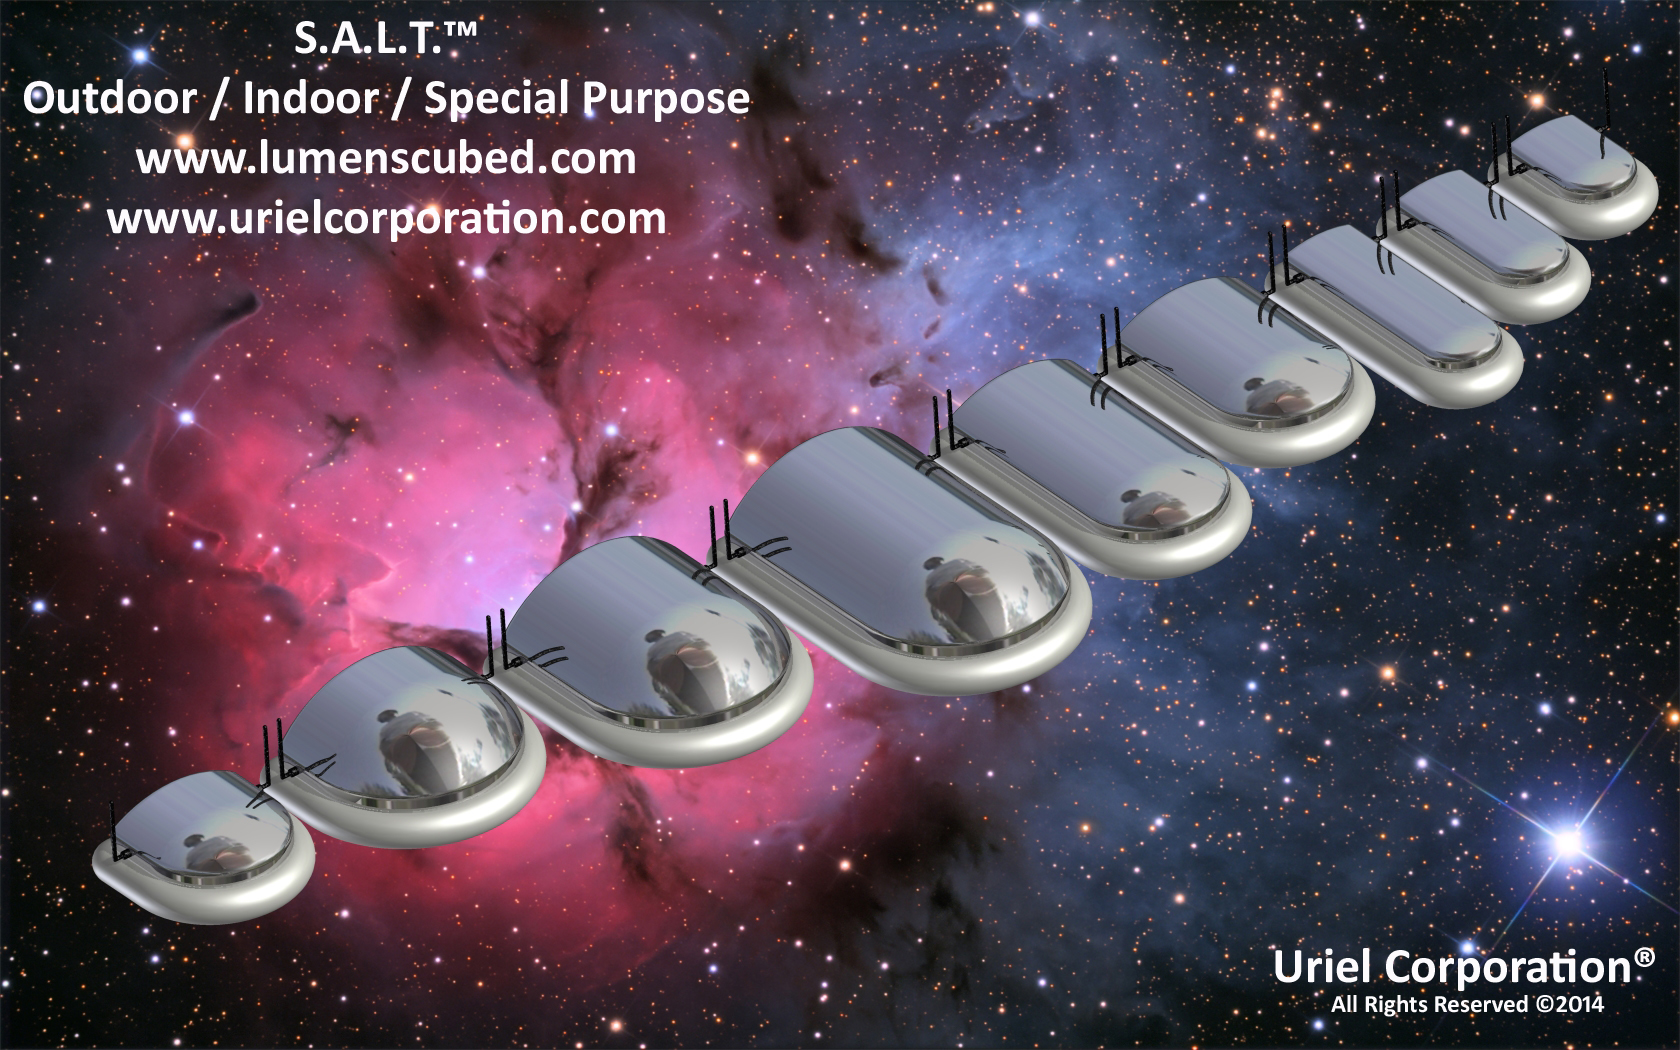 SERVO / STEPPER ASSISTED LIGHTING TECHNOLOGY (S.A.L.T.)™ OUTDOOR-INDOOR-SPECIAL PURPOSE METALLIC LED LIGHTING